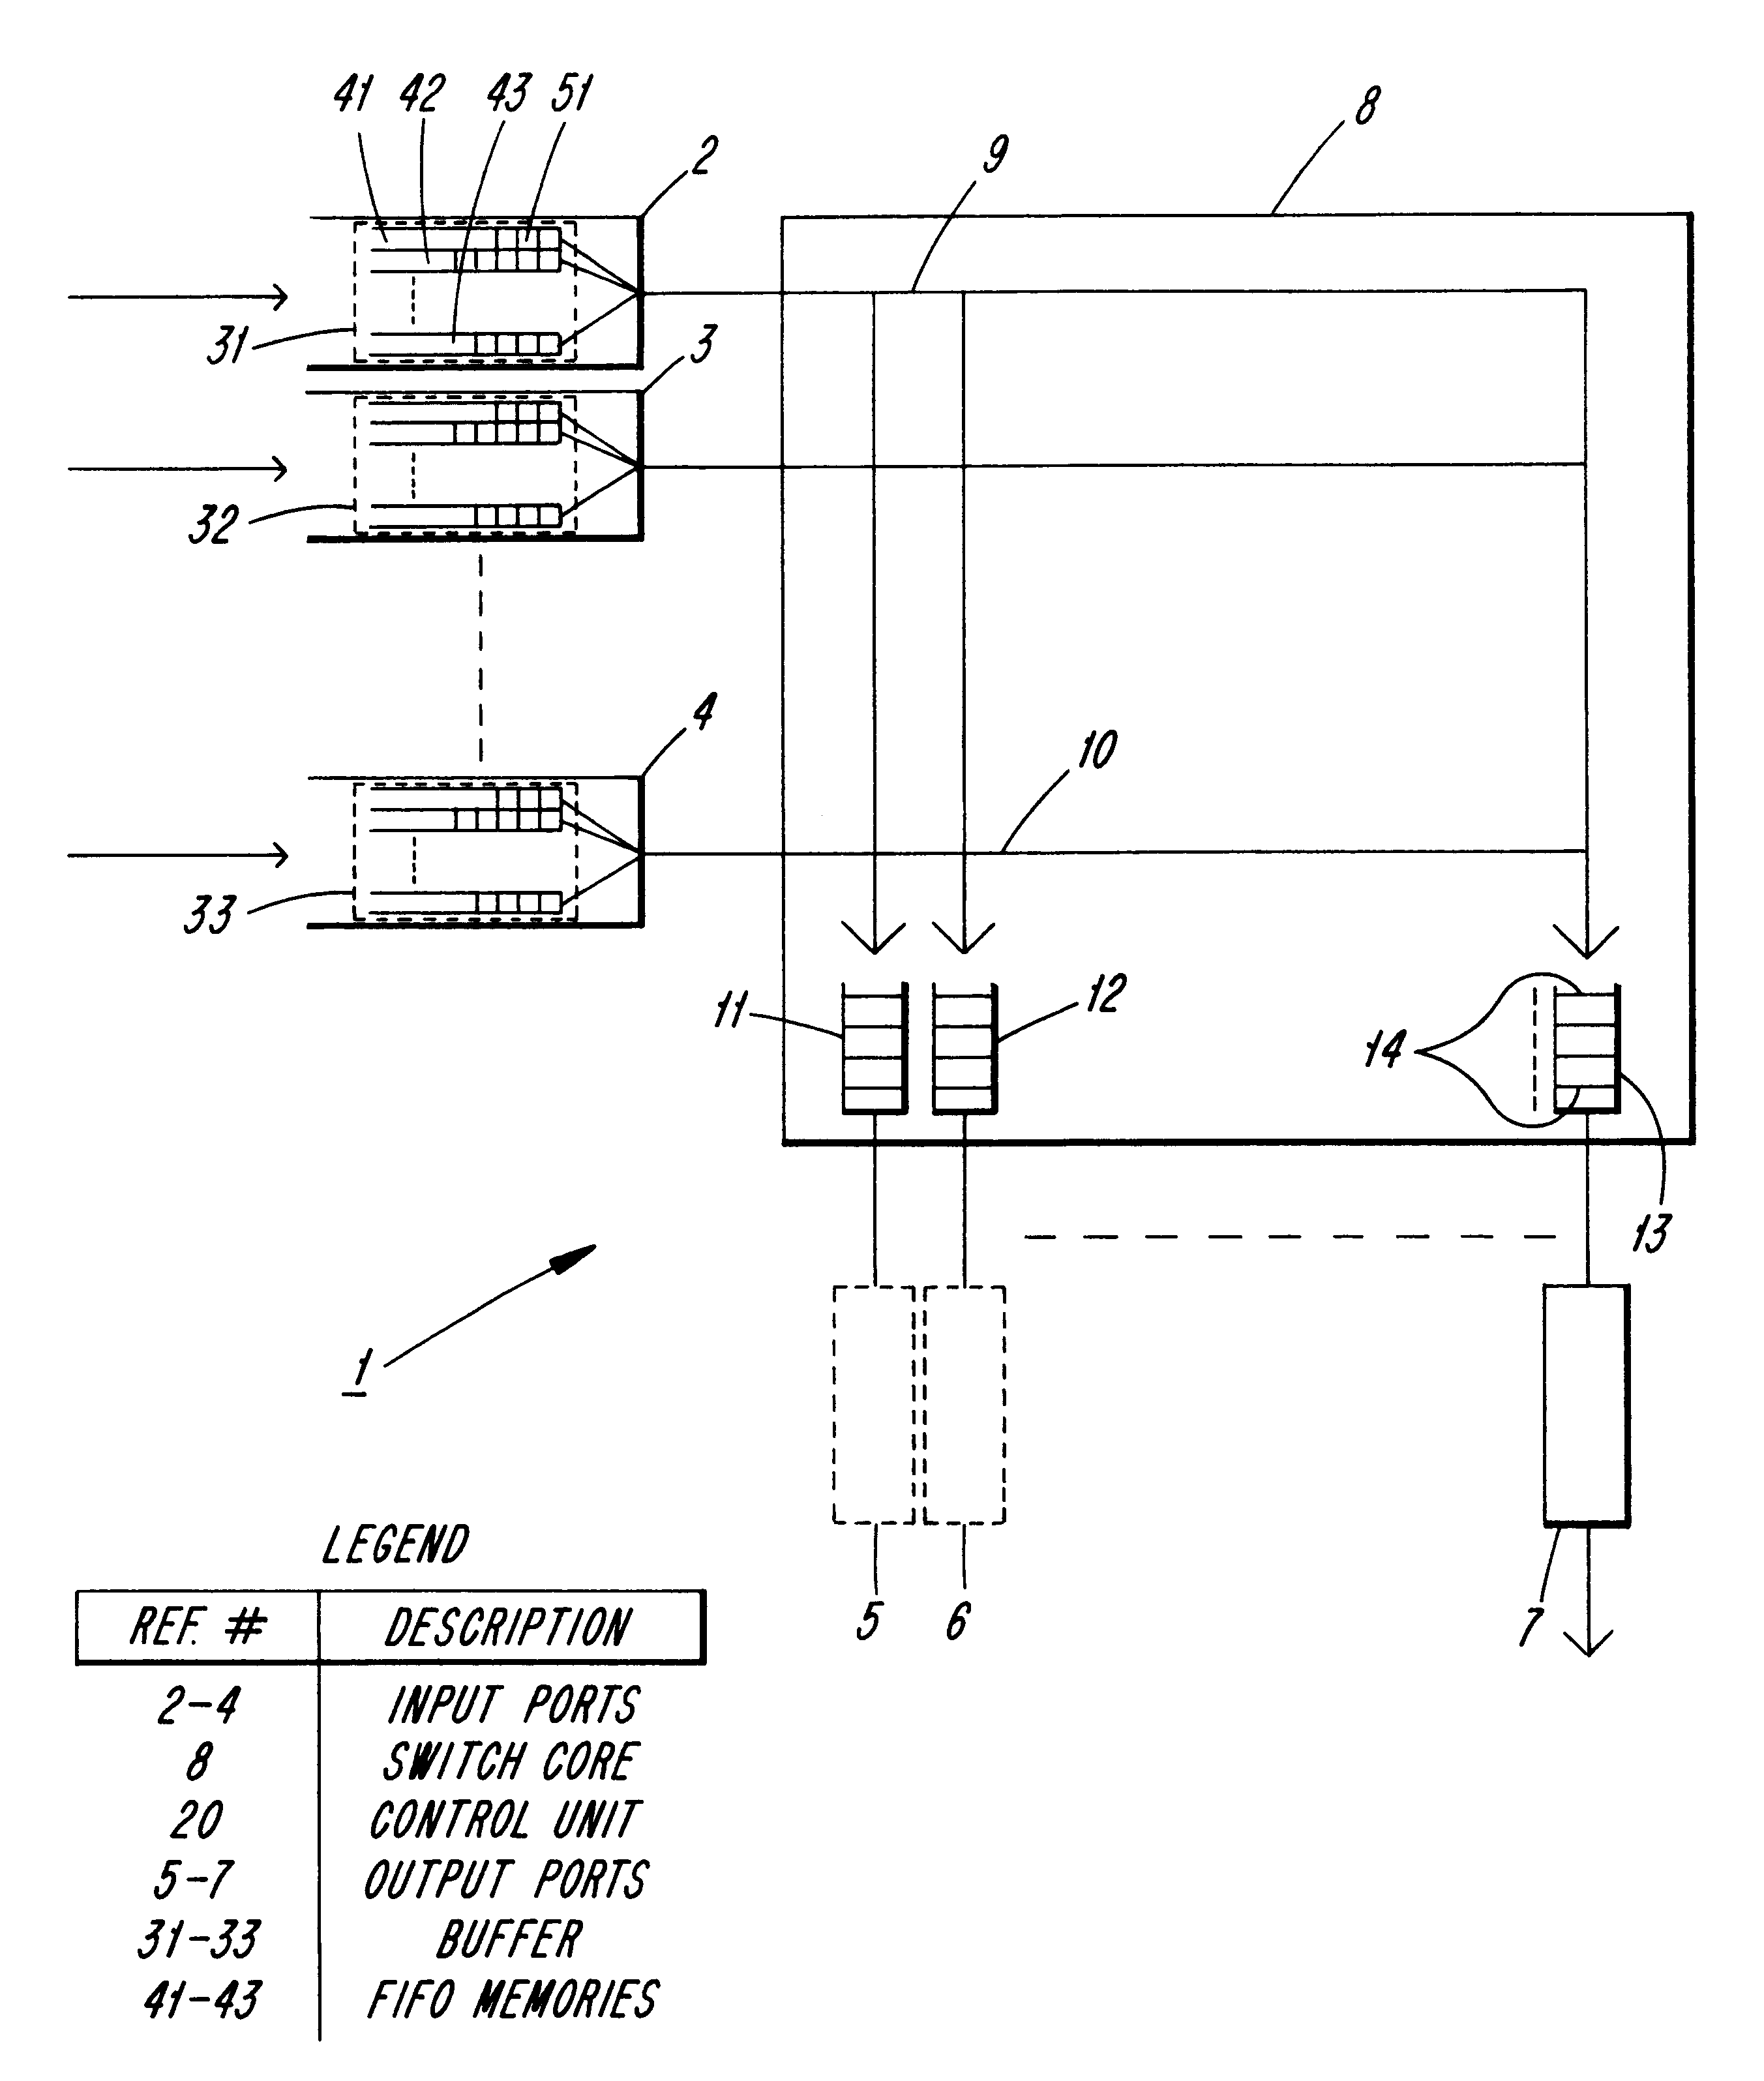 Flow control for switching